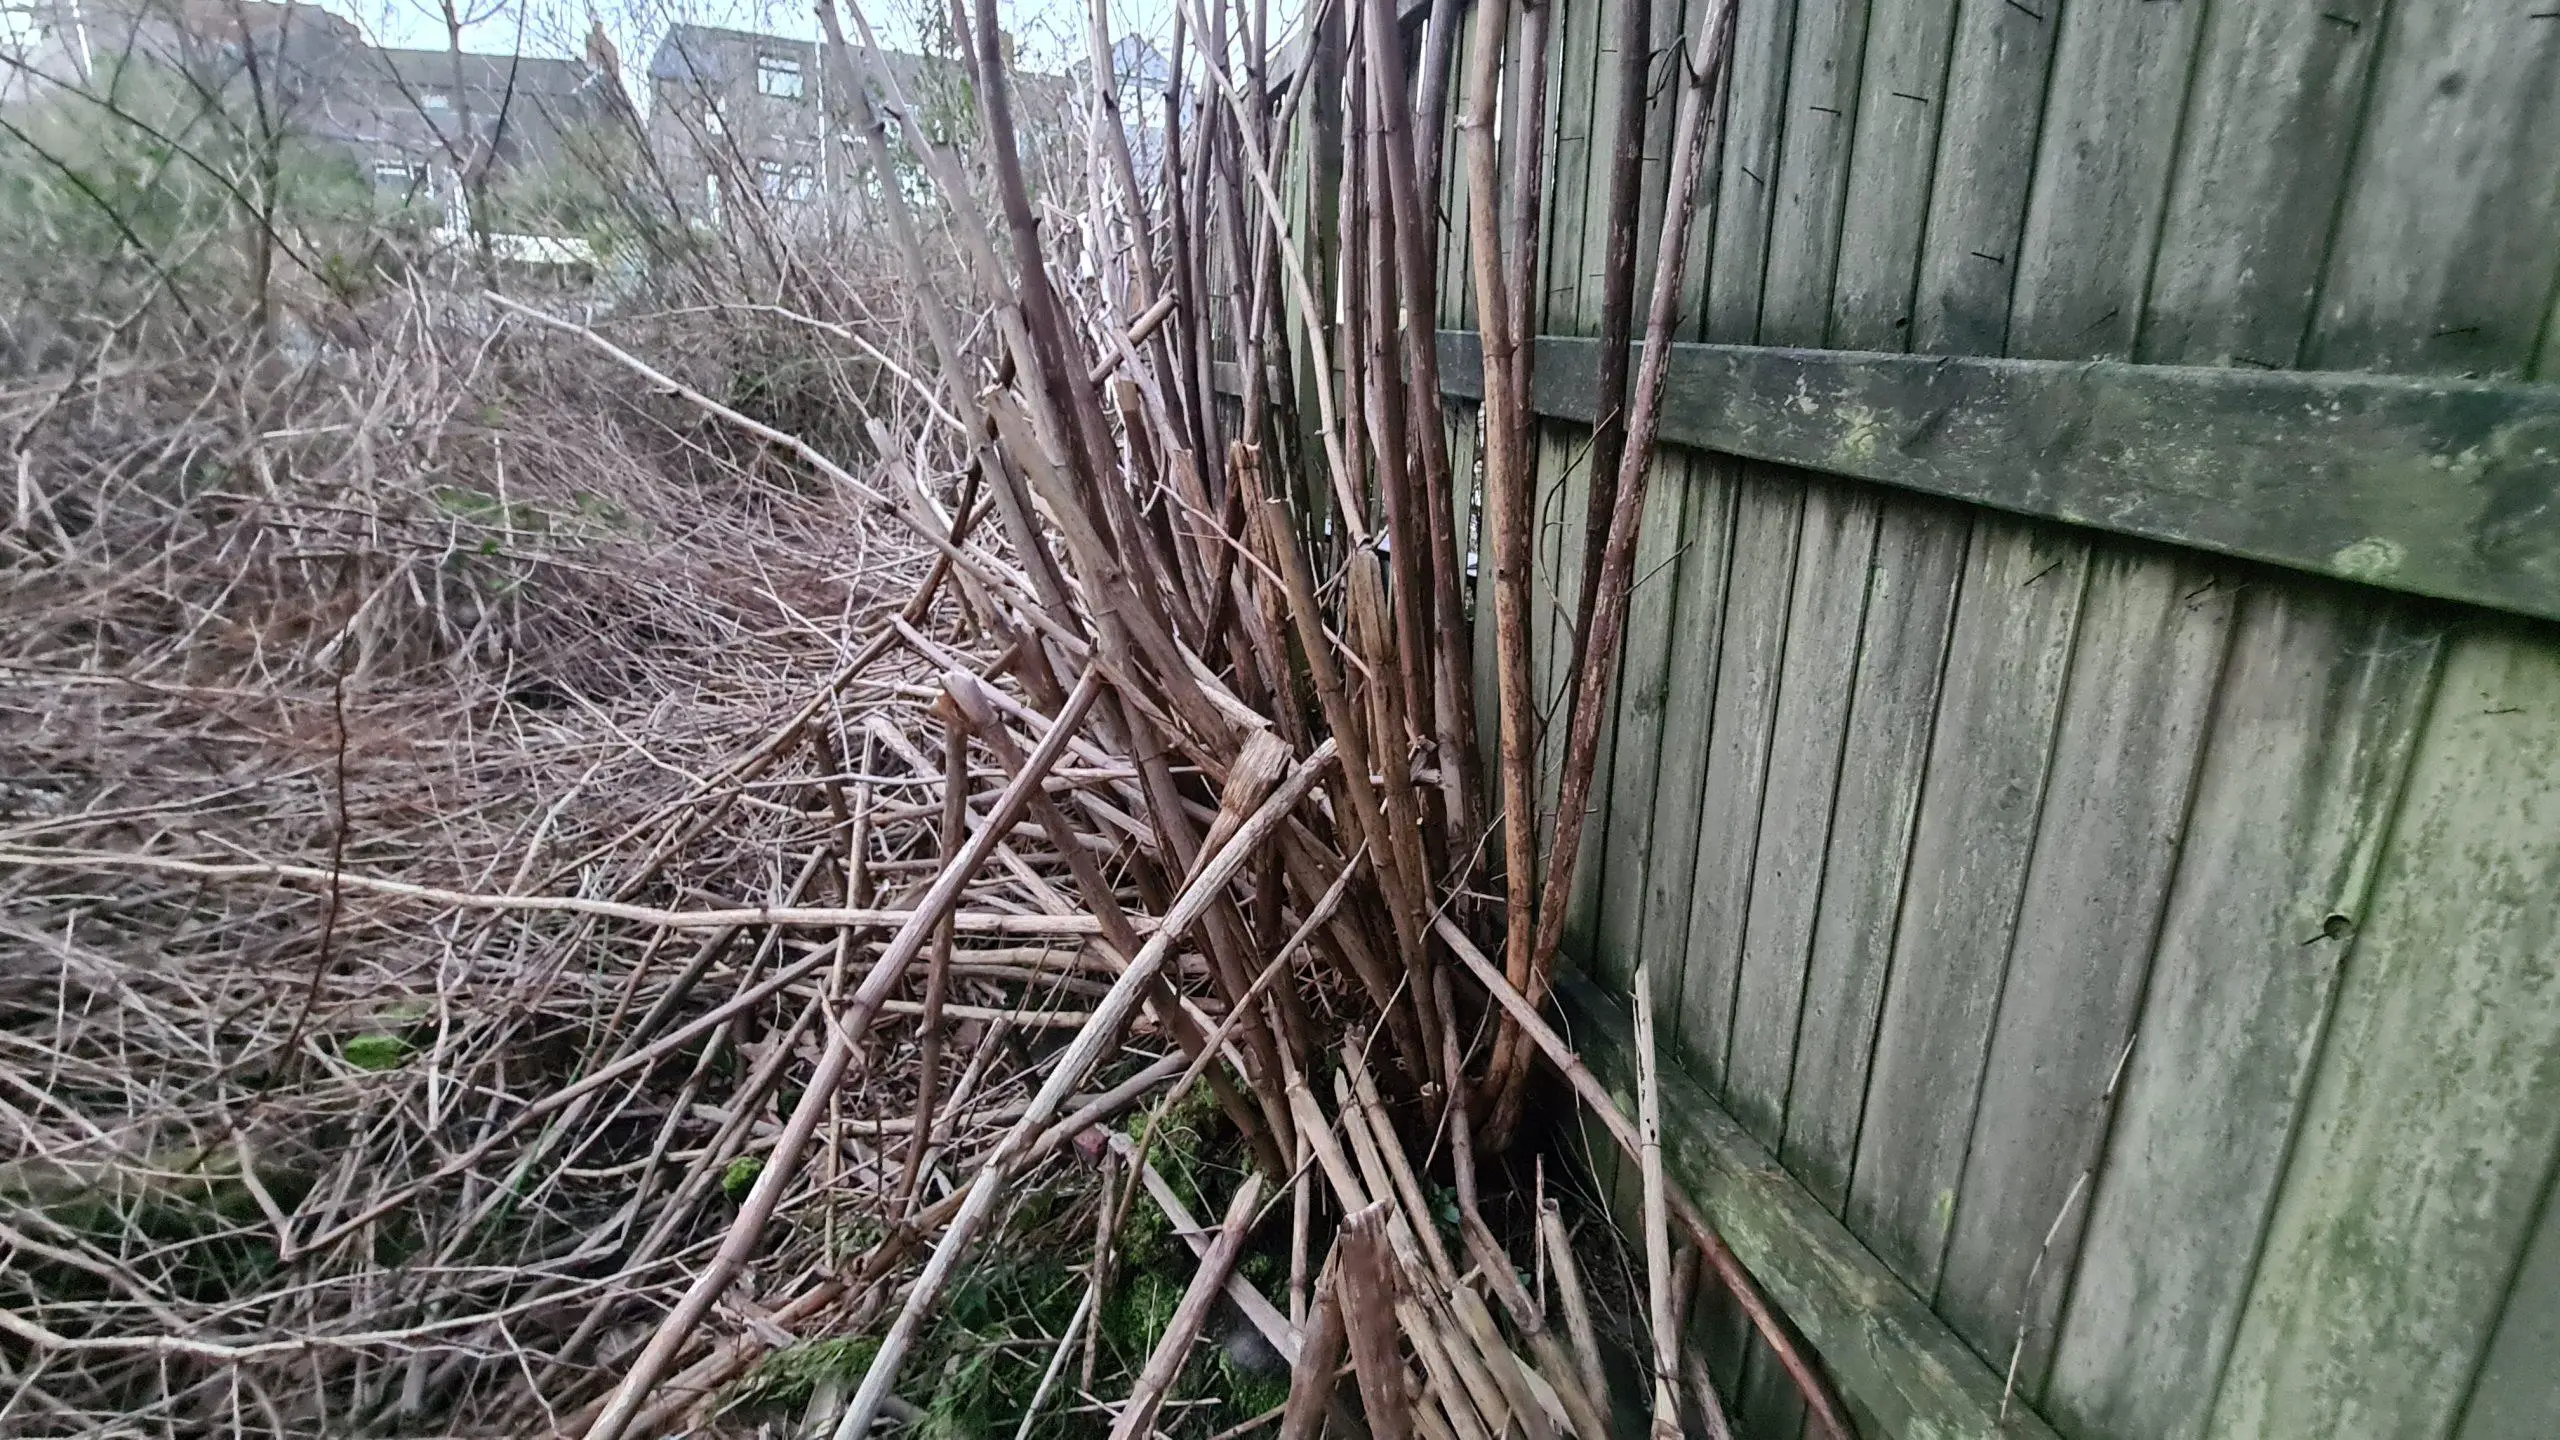 Beginning the process of cutting down the dead stems to remove Japanese knotweed from a garden